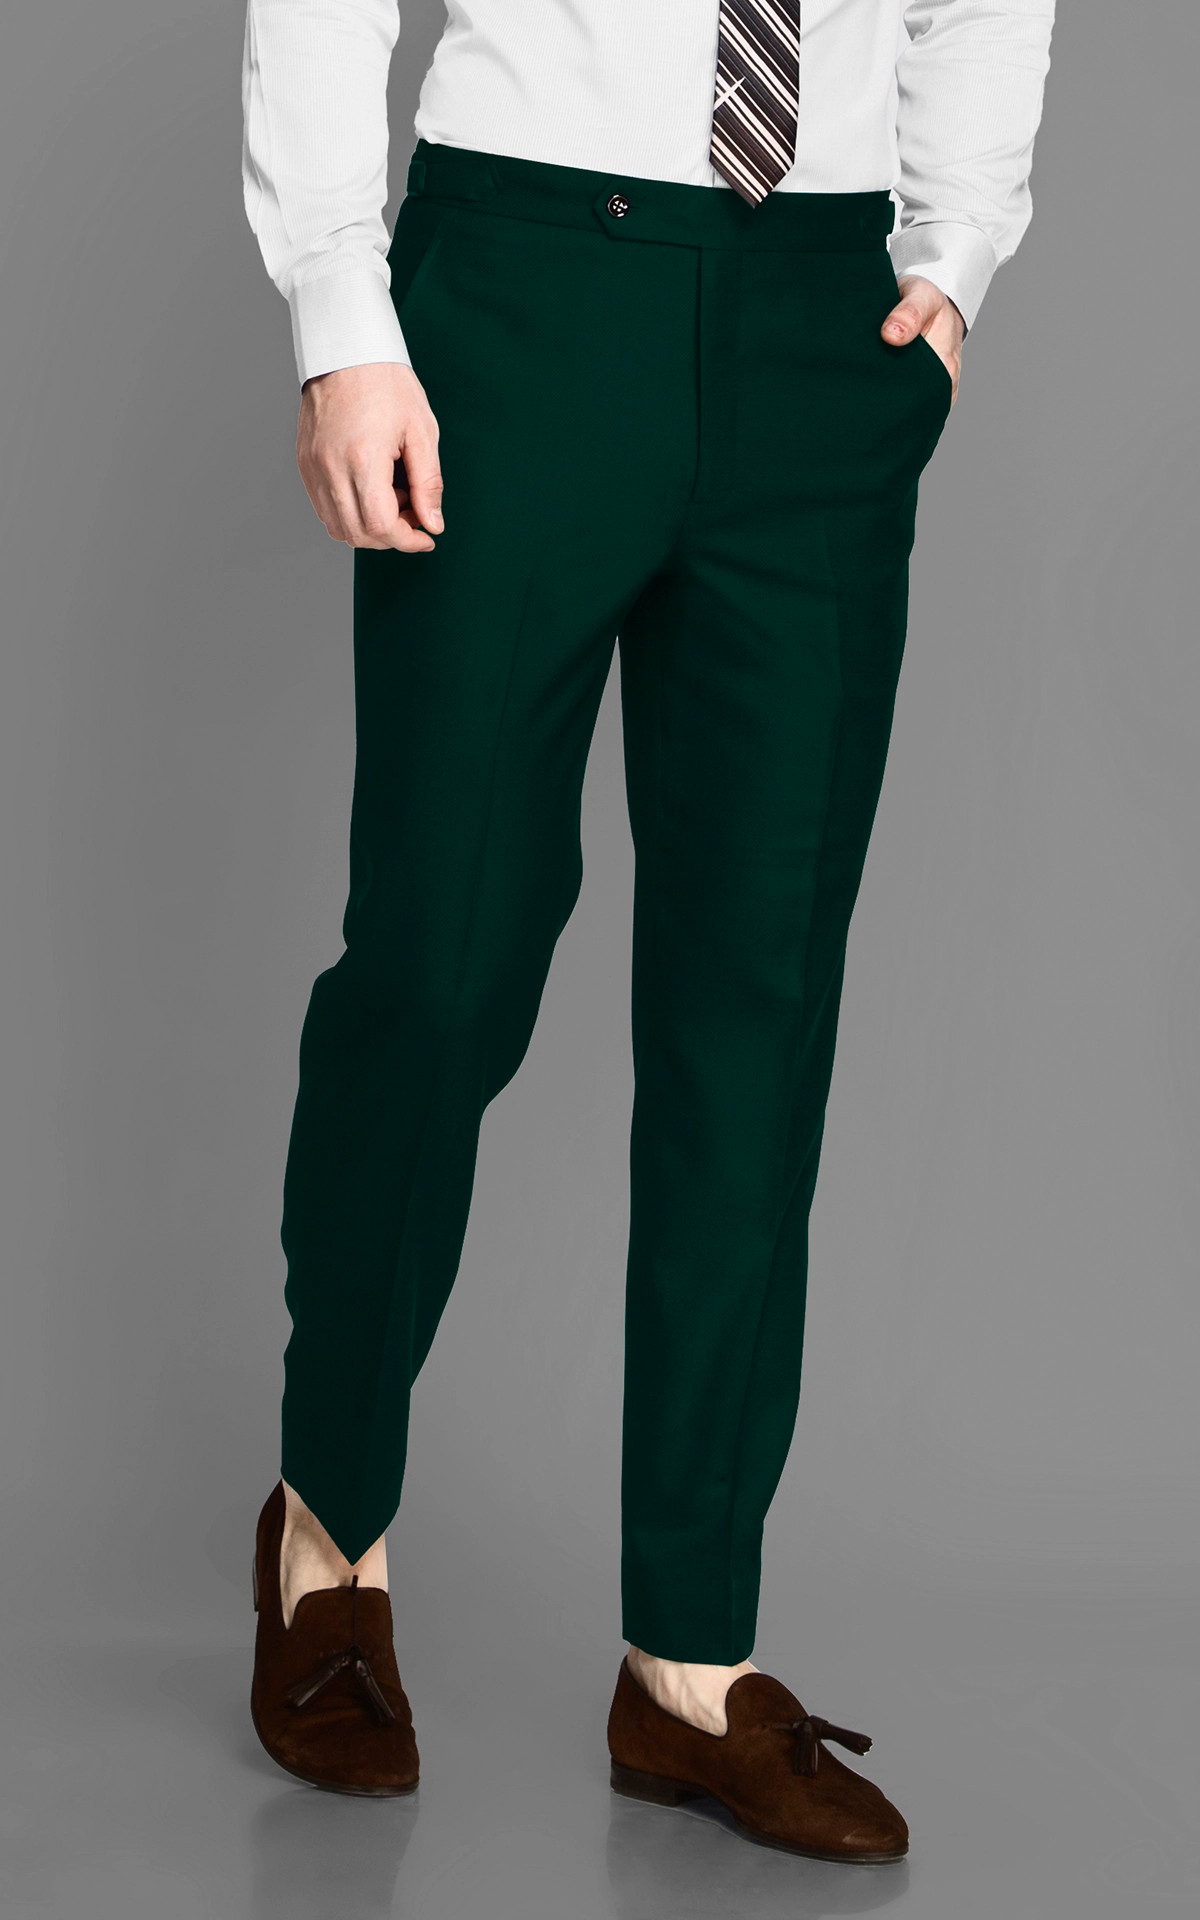 Buy Zee Gold Men's Military Green Regular Straight Relaxed Fit Formal  Trousers (Size - 28) at Amazon.in